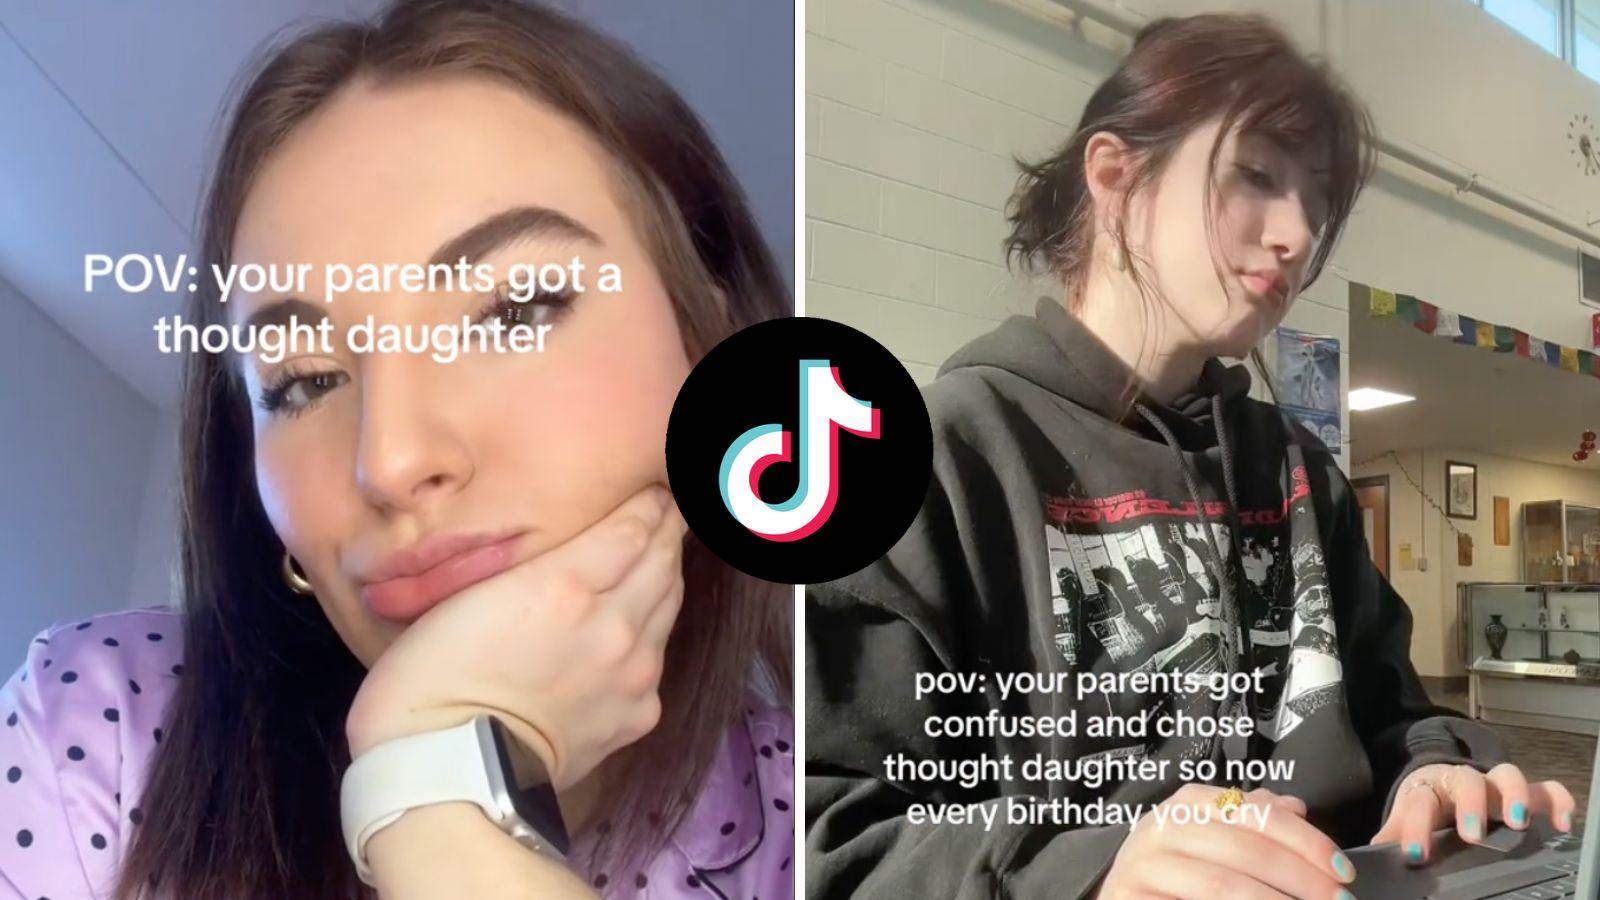 Thought daughter trend on TikTok